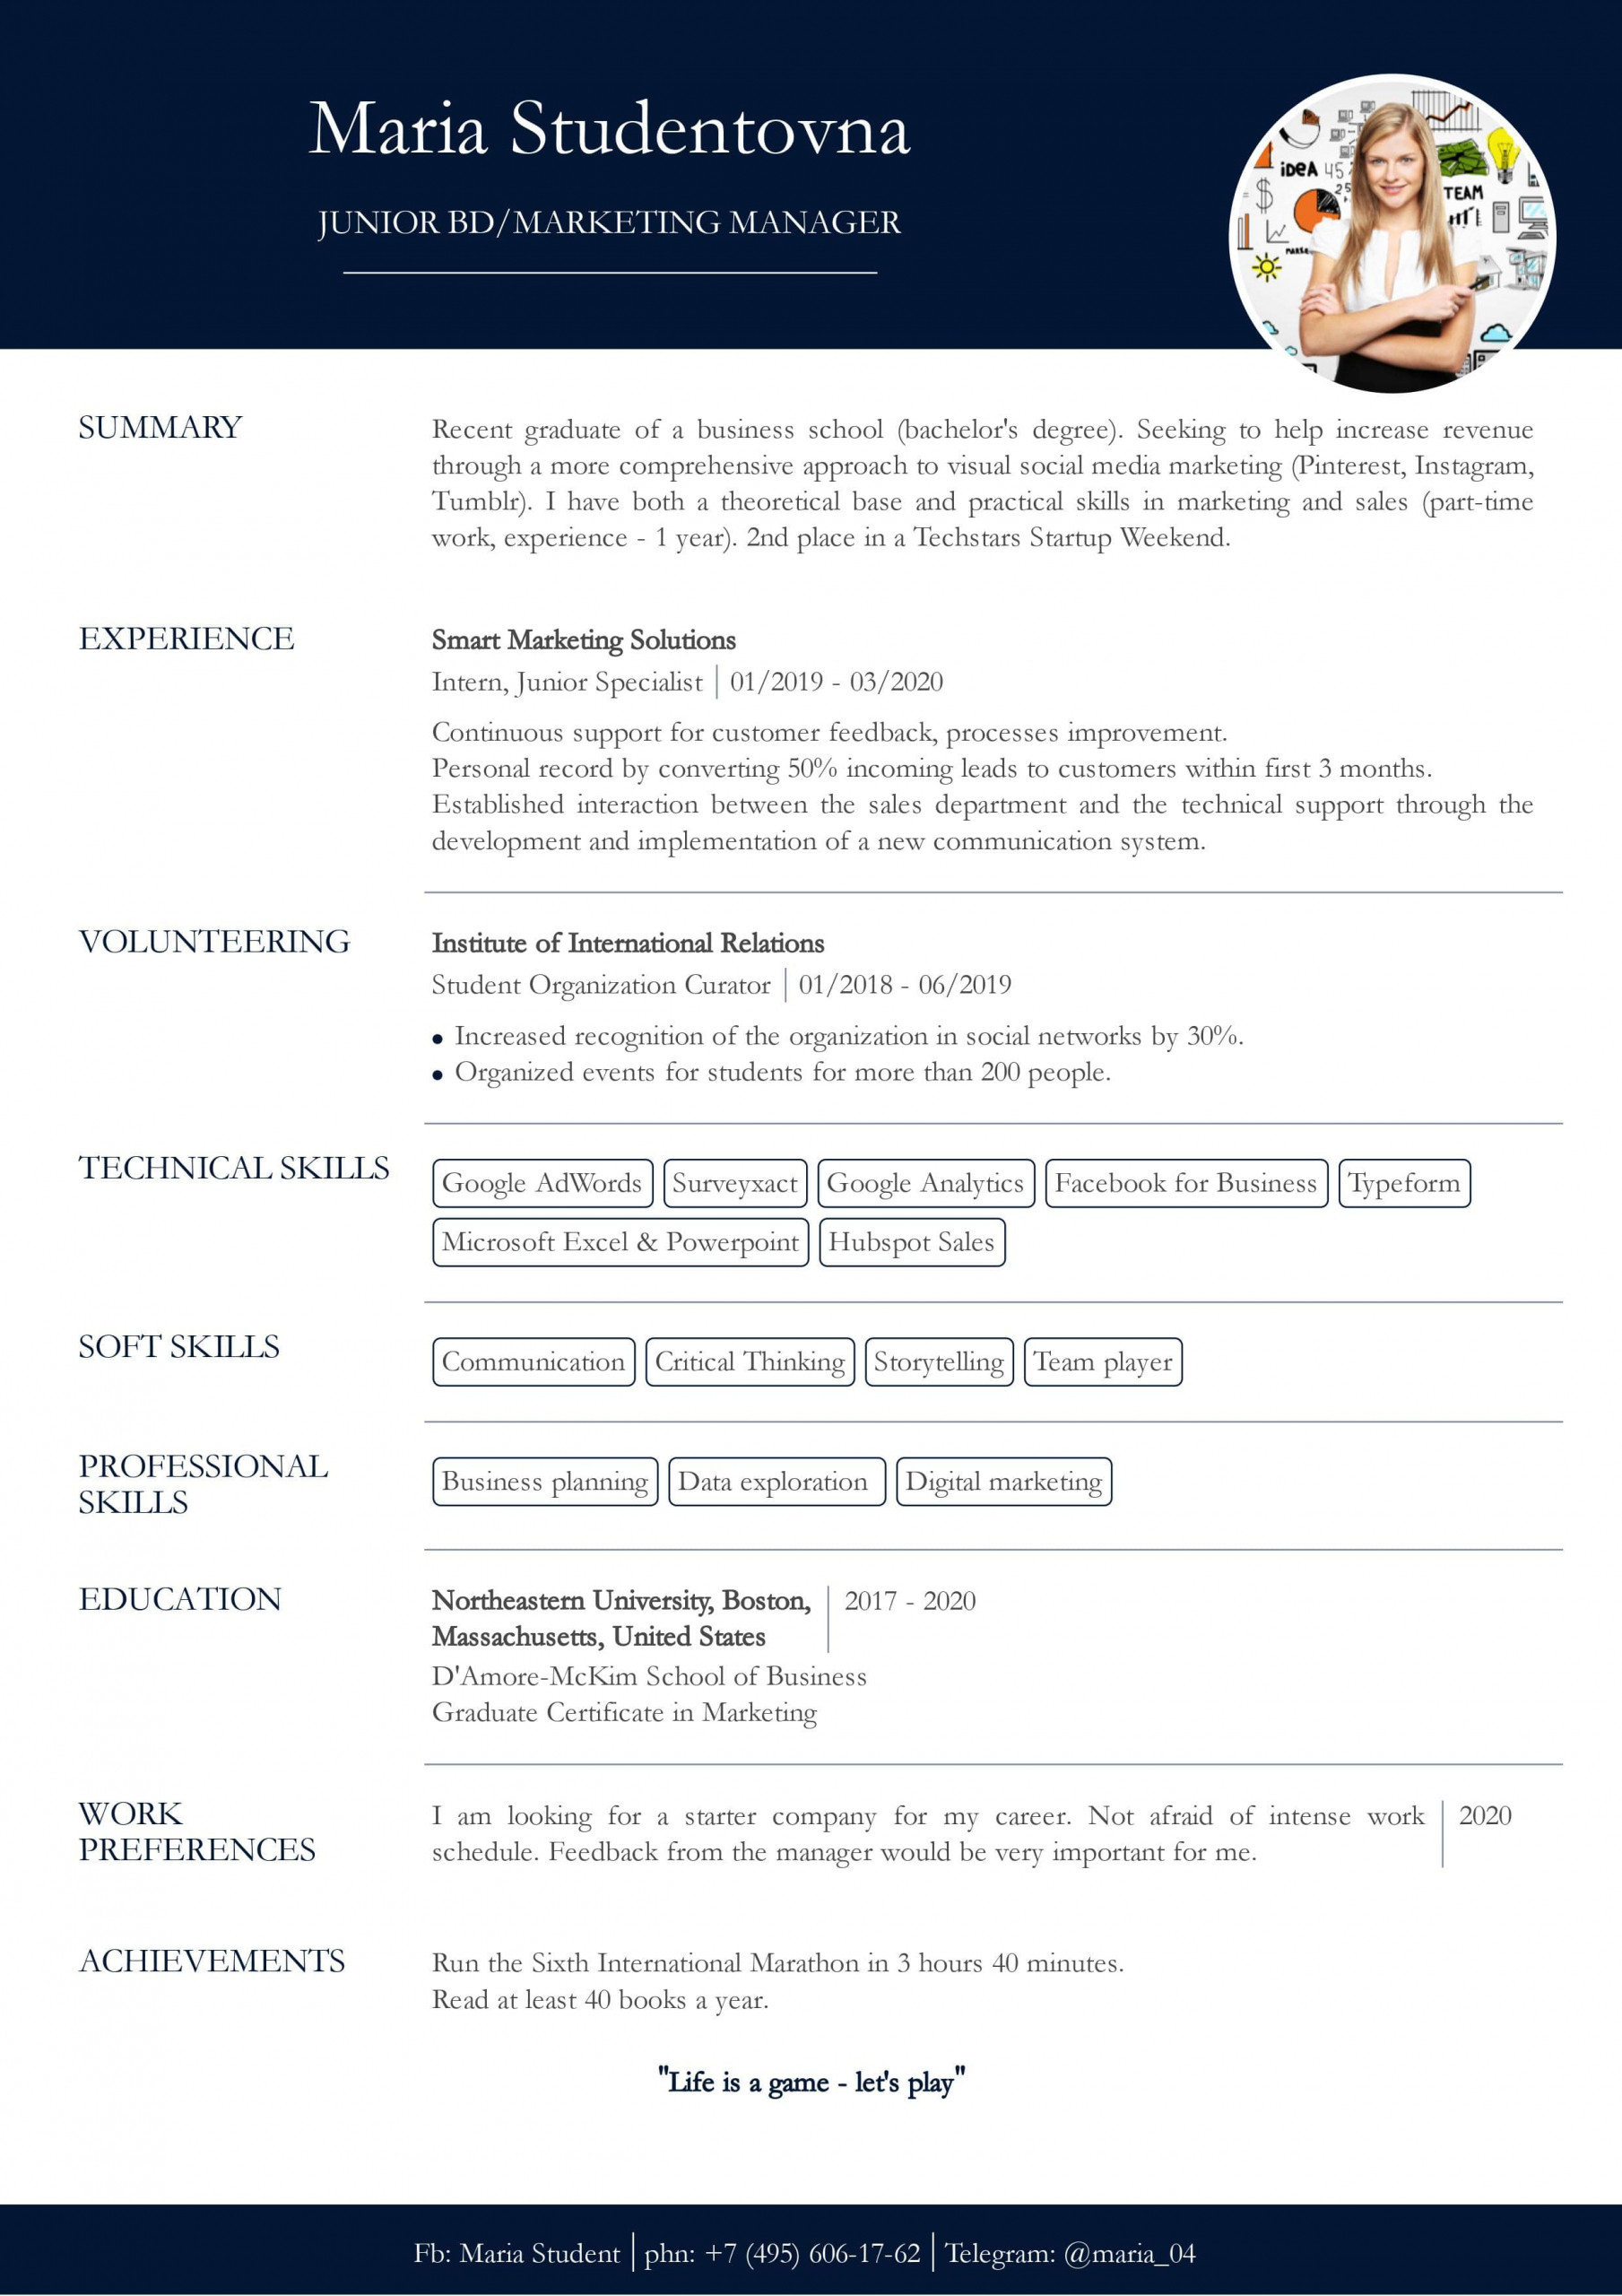 Resume Template for People with No Experience Resume with No Work Experience. Sample for Students. – Cv2you Blog